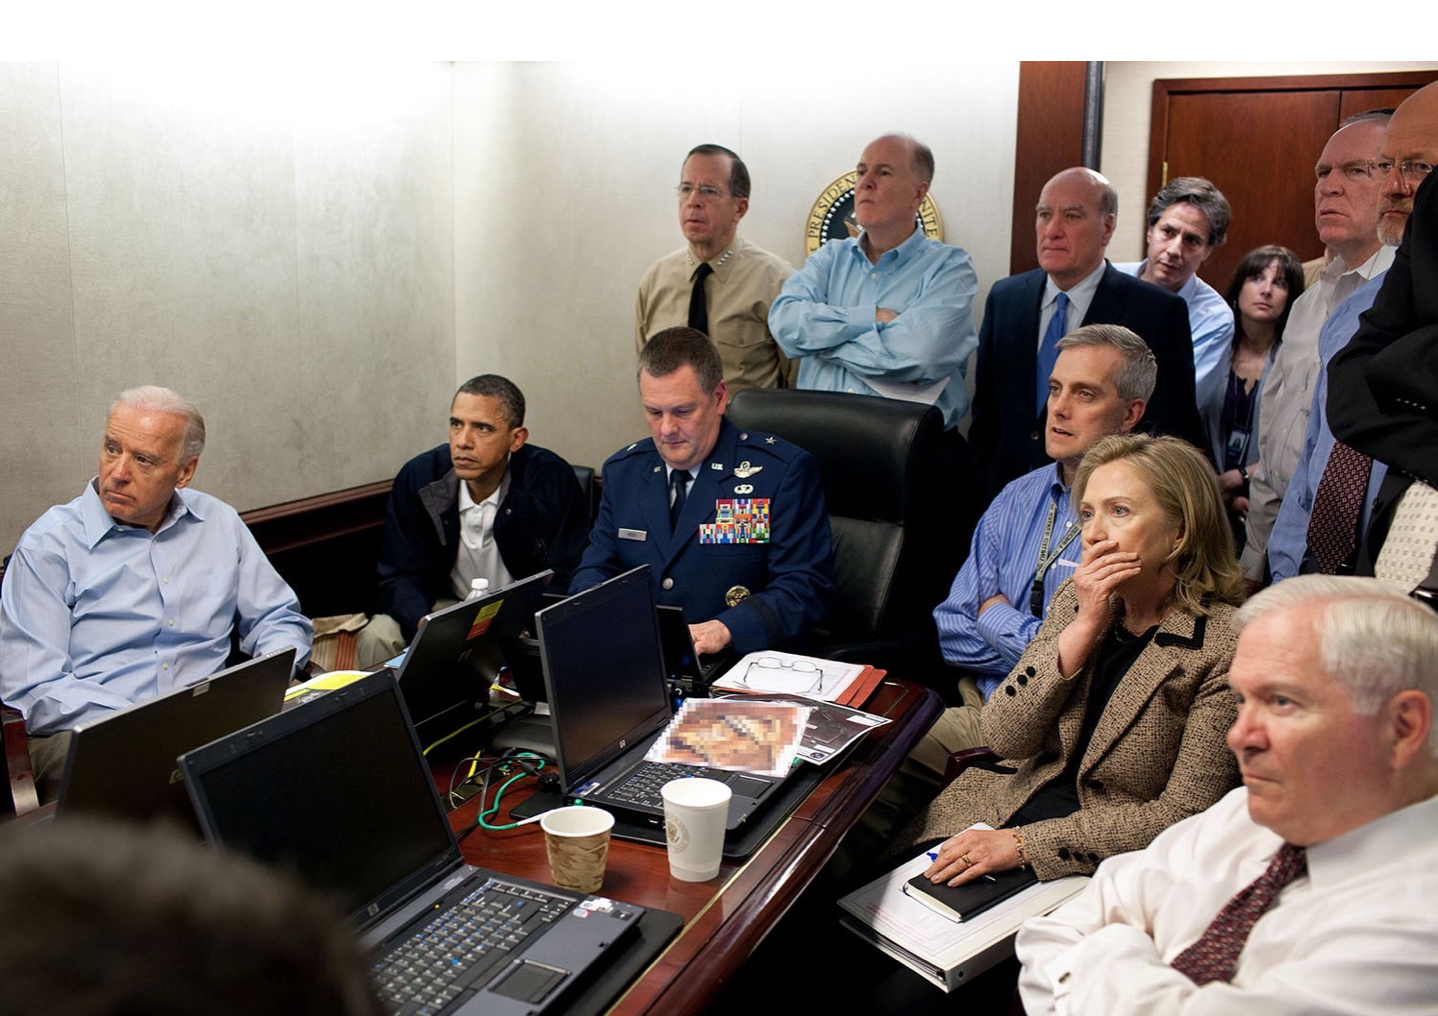 Vice President Joe Biden and President Barack Obama, along with members of the national-security team, receive an update on the mission against Osama bin Laden in the Situation Room of the White House on May 1, 2011. Please note: a classified document seen in this photograph has been obscured. (Official White House Photo by Pete Souza)